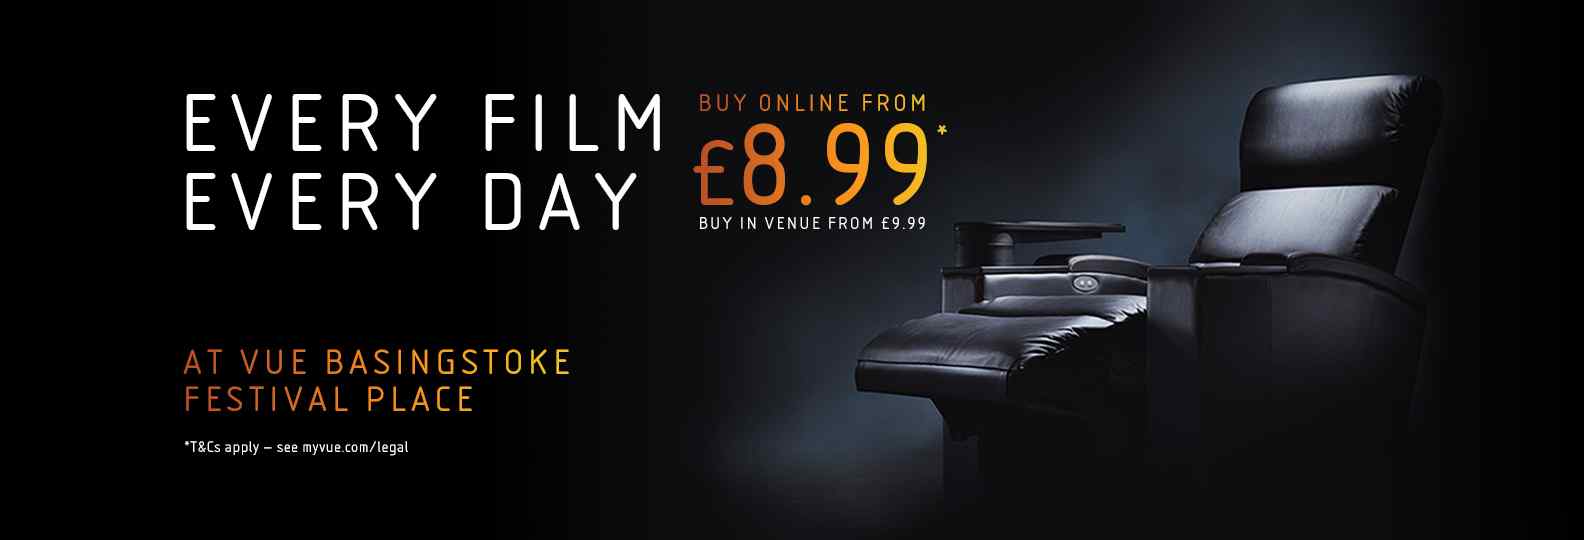 Vue Basingstoke Festival Place | Every Film, Every Day from £8.99